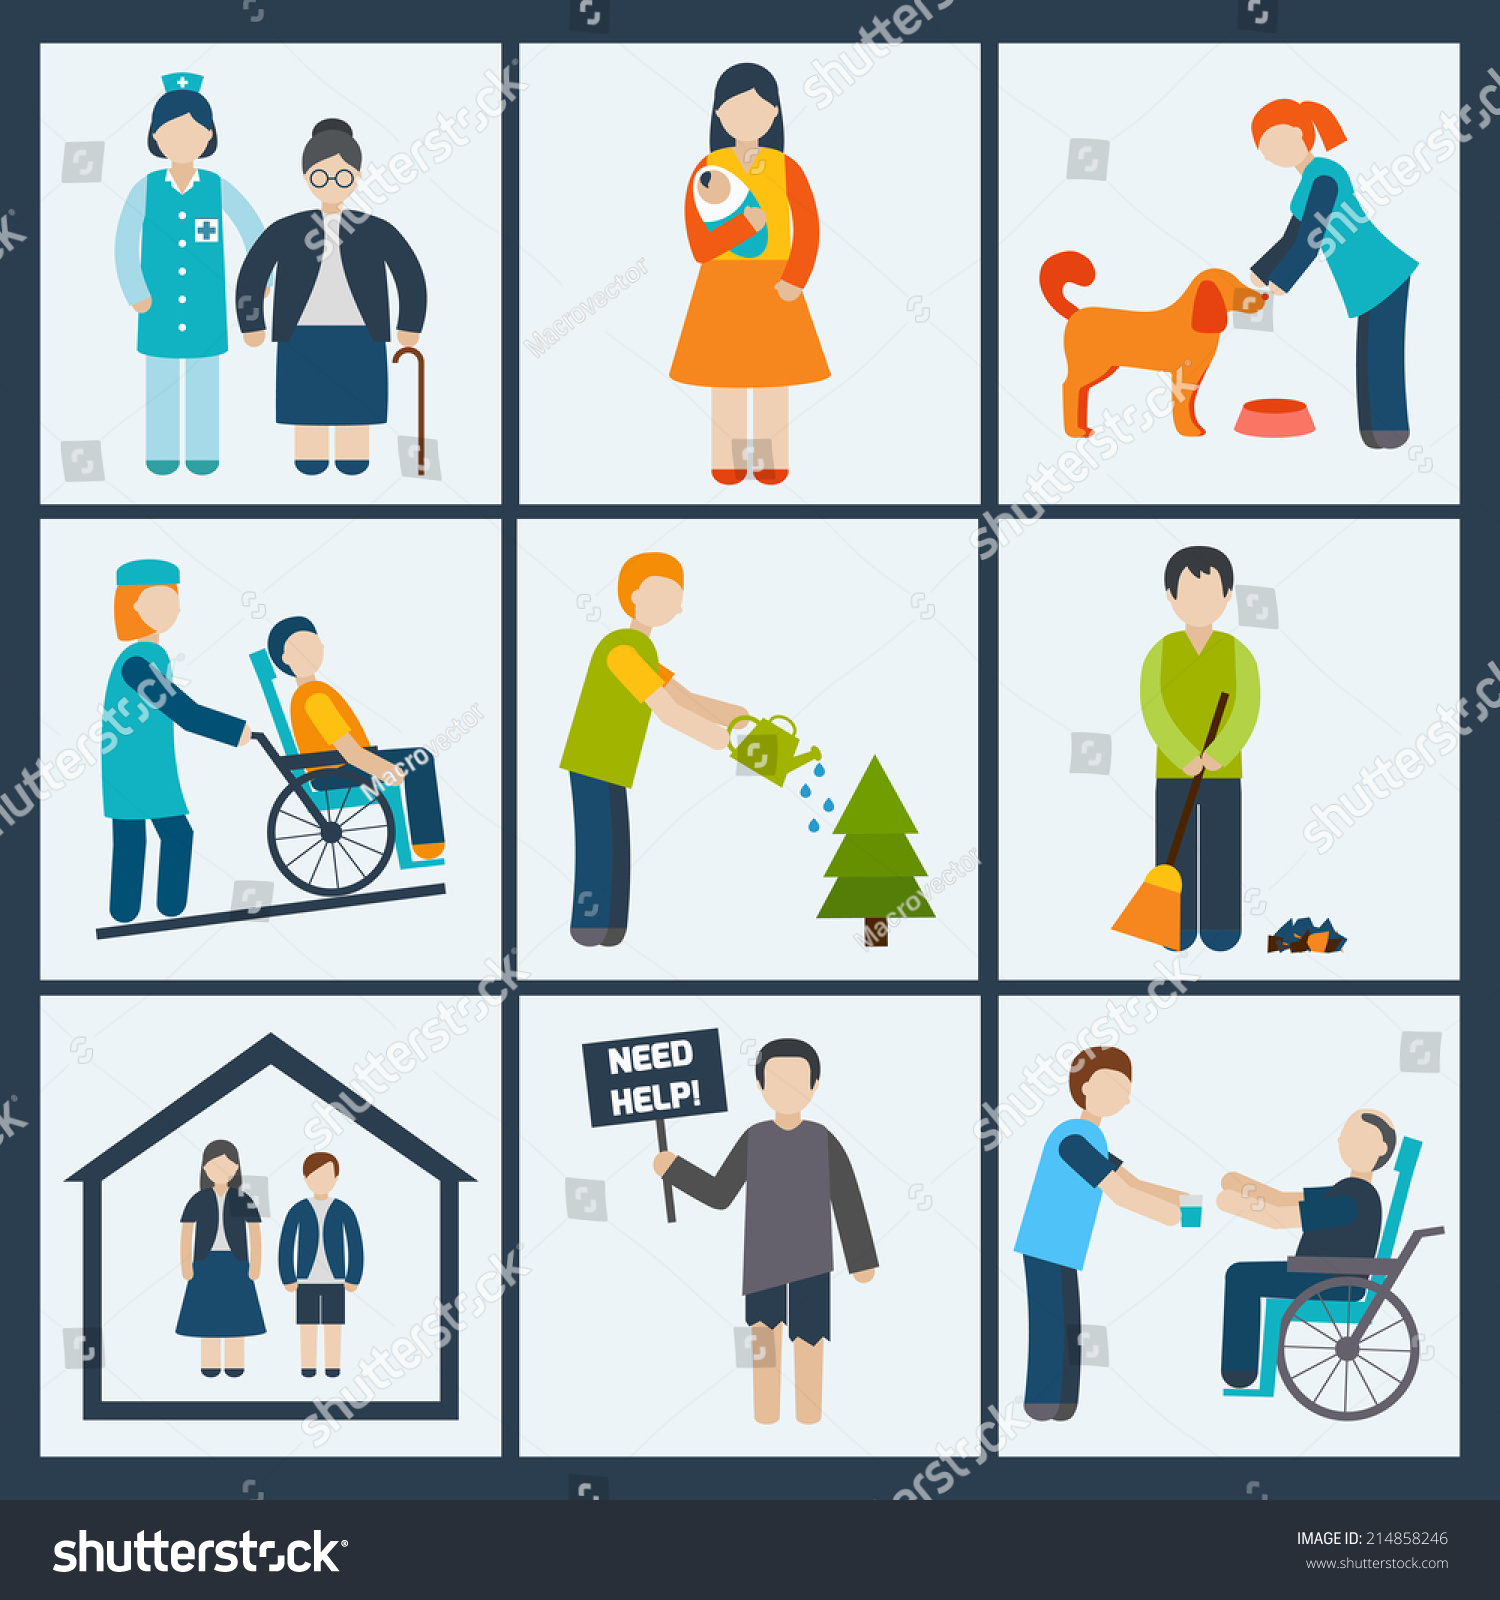 human services clipart - photo #10